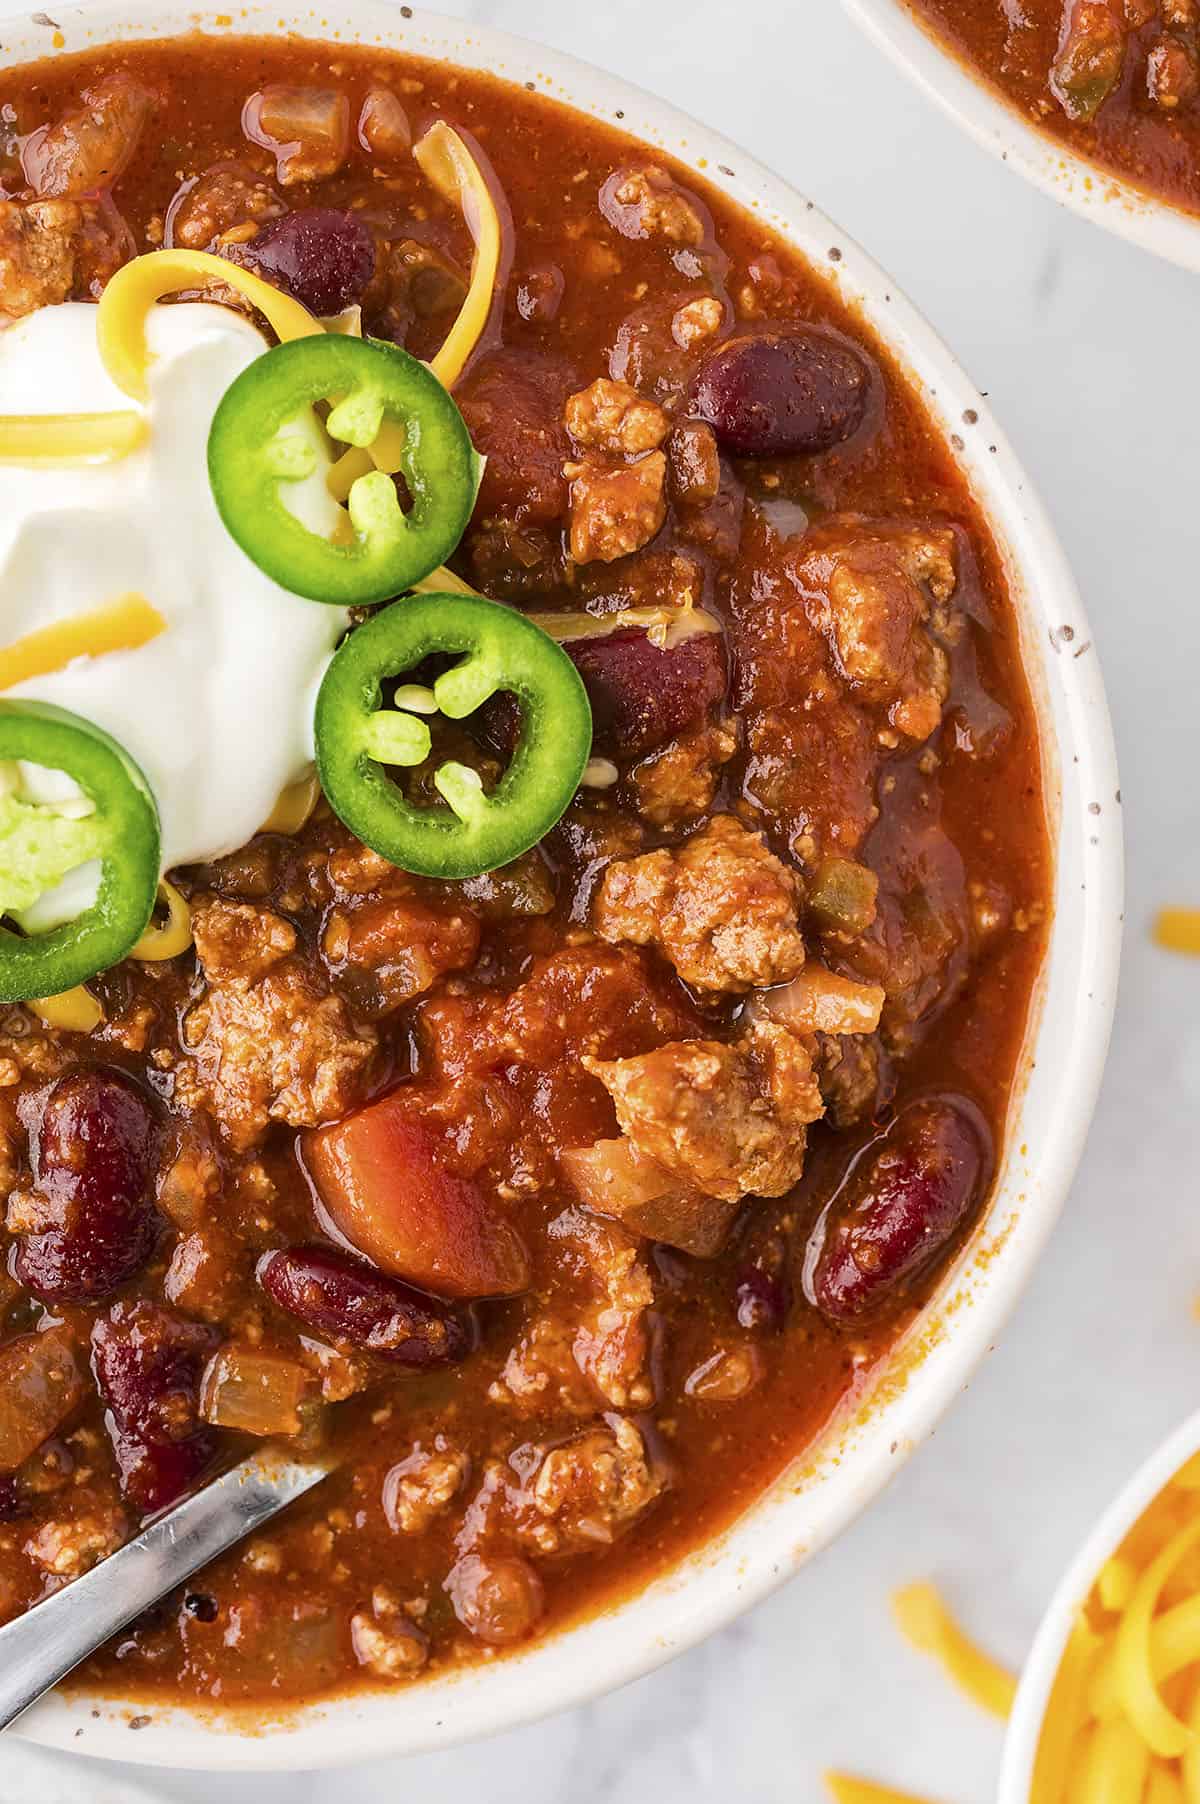 A bowl of chili next to a pot.